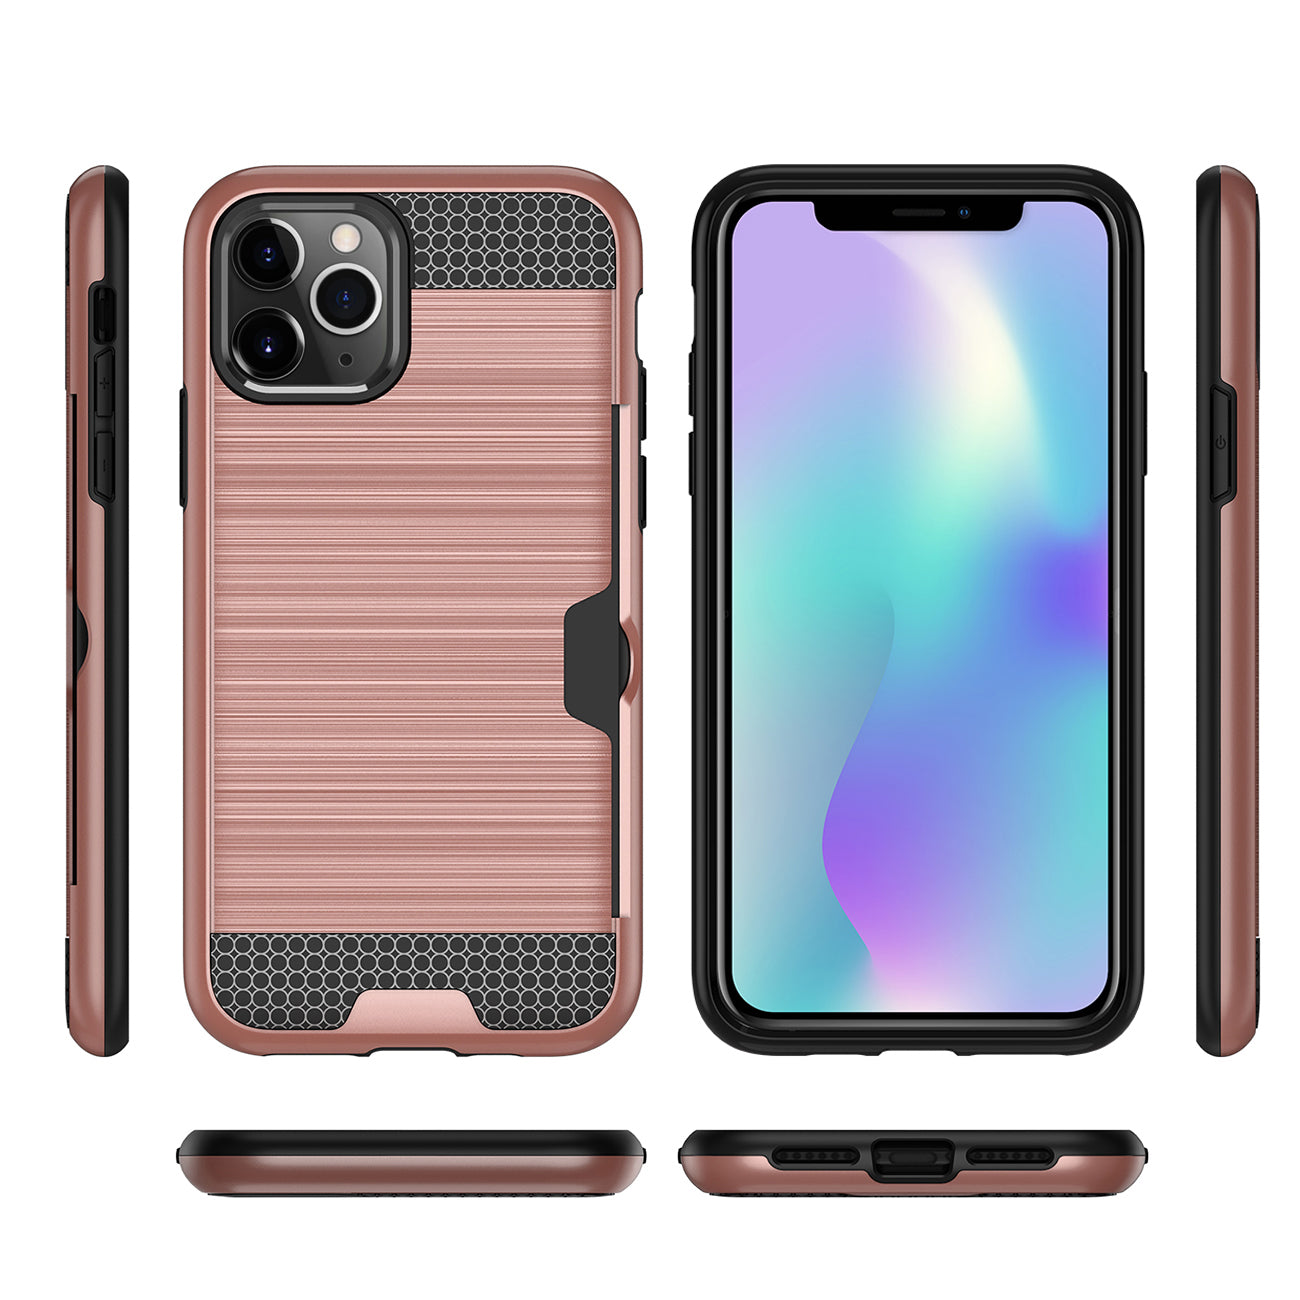 Case Hybrid Slim Armor With Card Holder iPhone 11 Pro Max Rose Gold Color